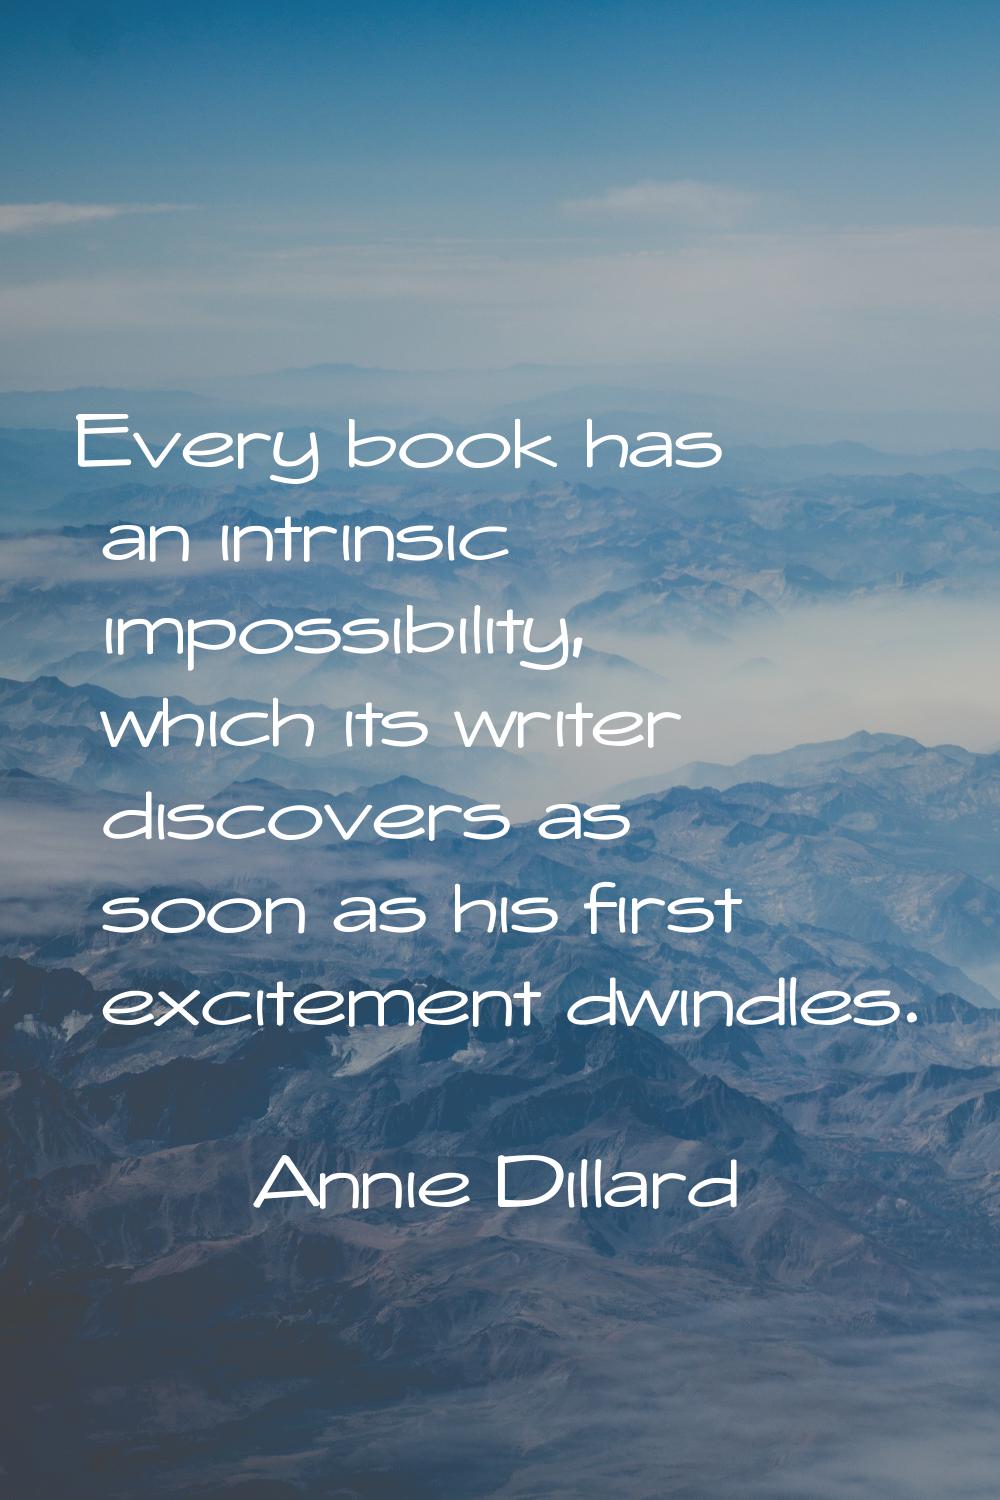 Every book has an intrinsic impossibility, which its writer discovers as soon as his first exciteme